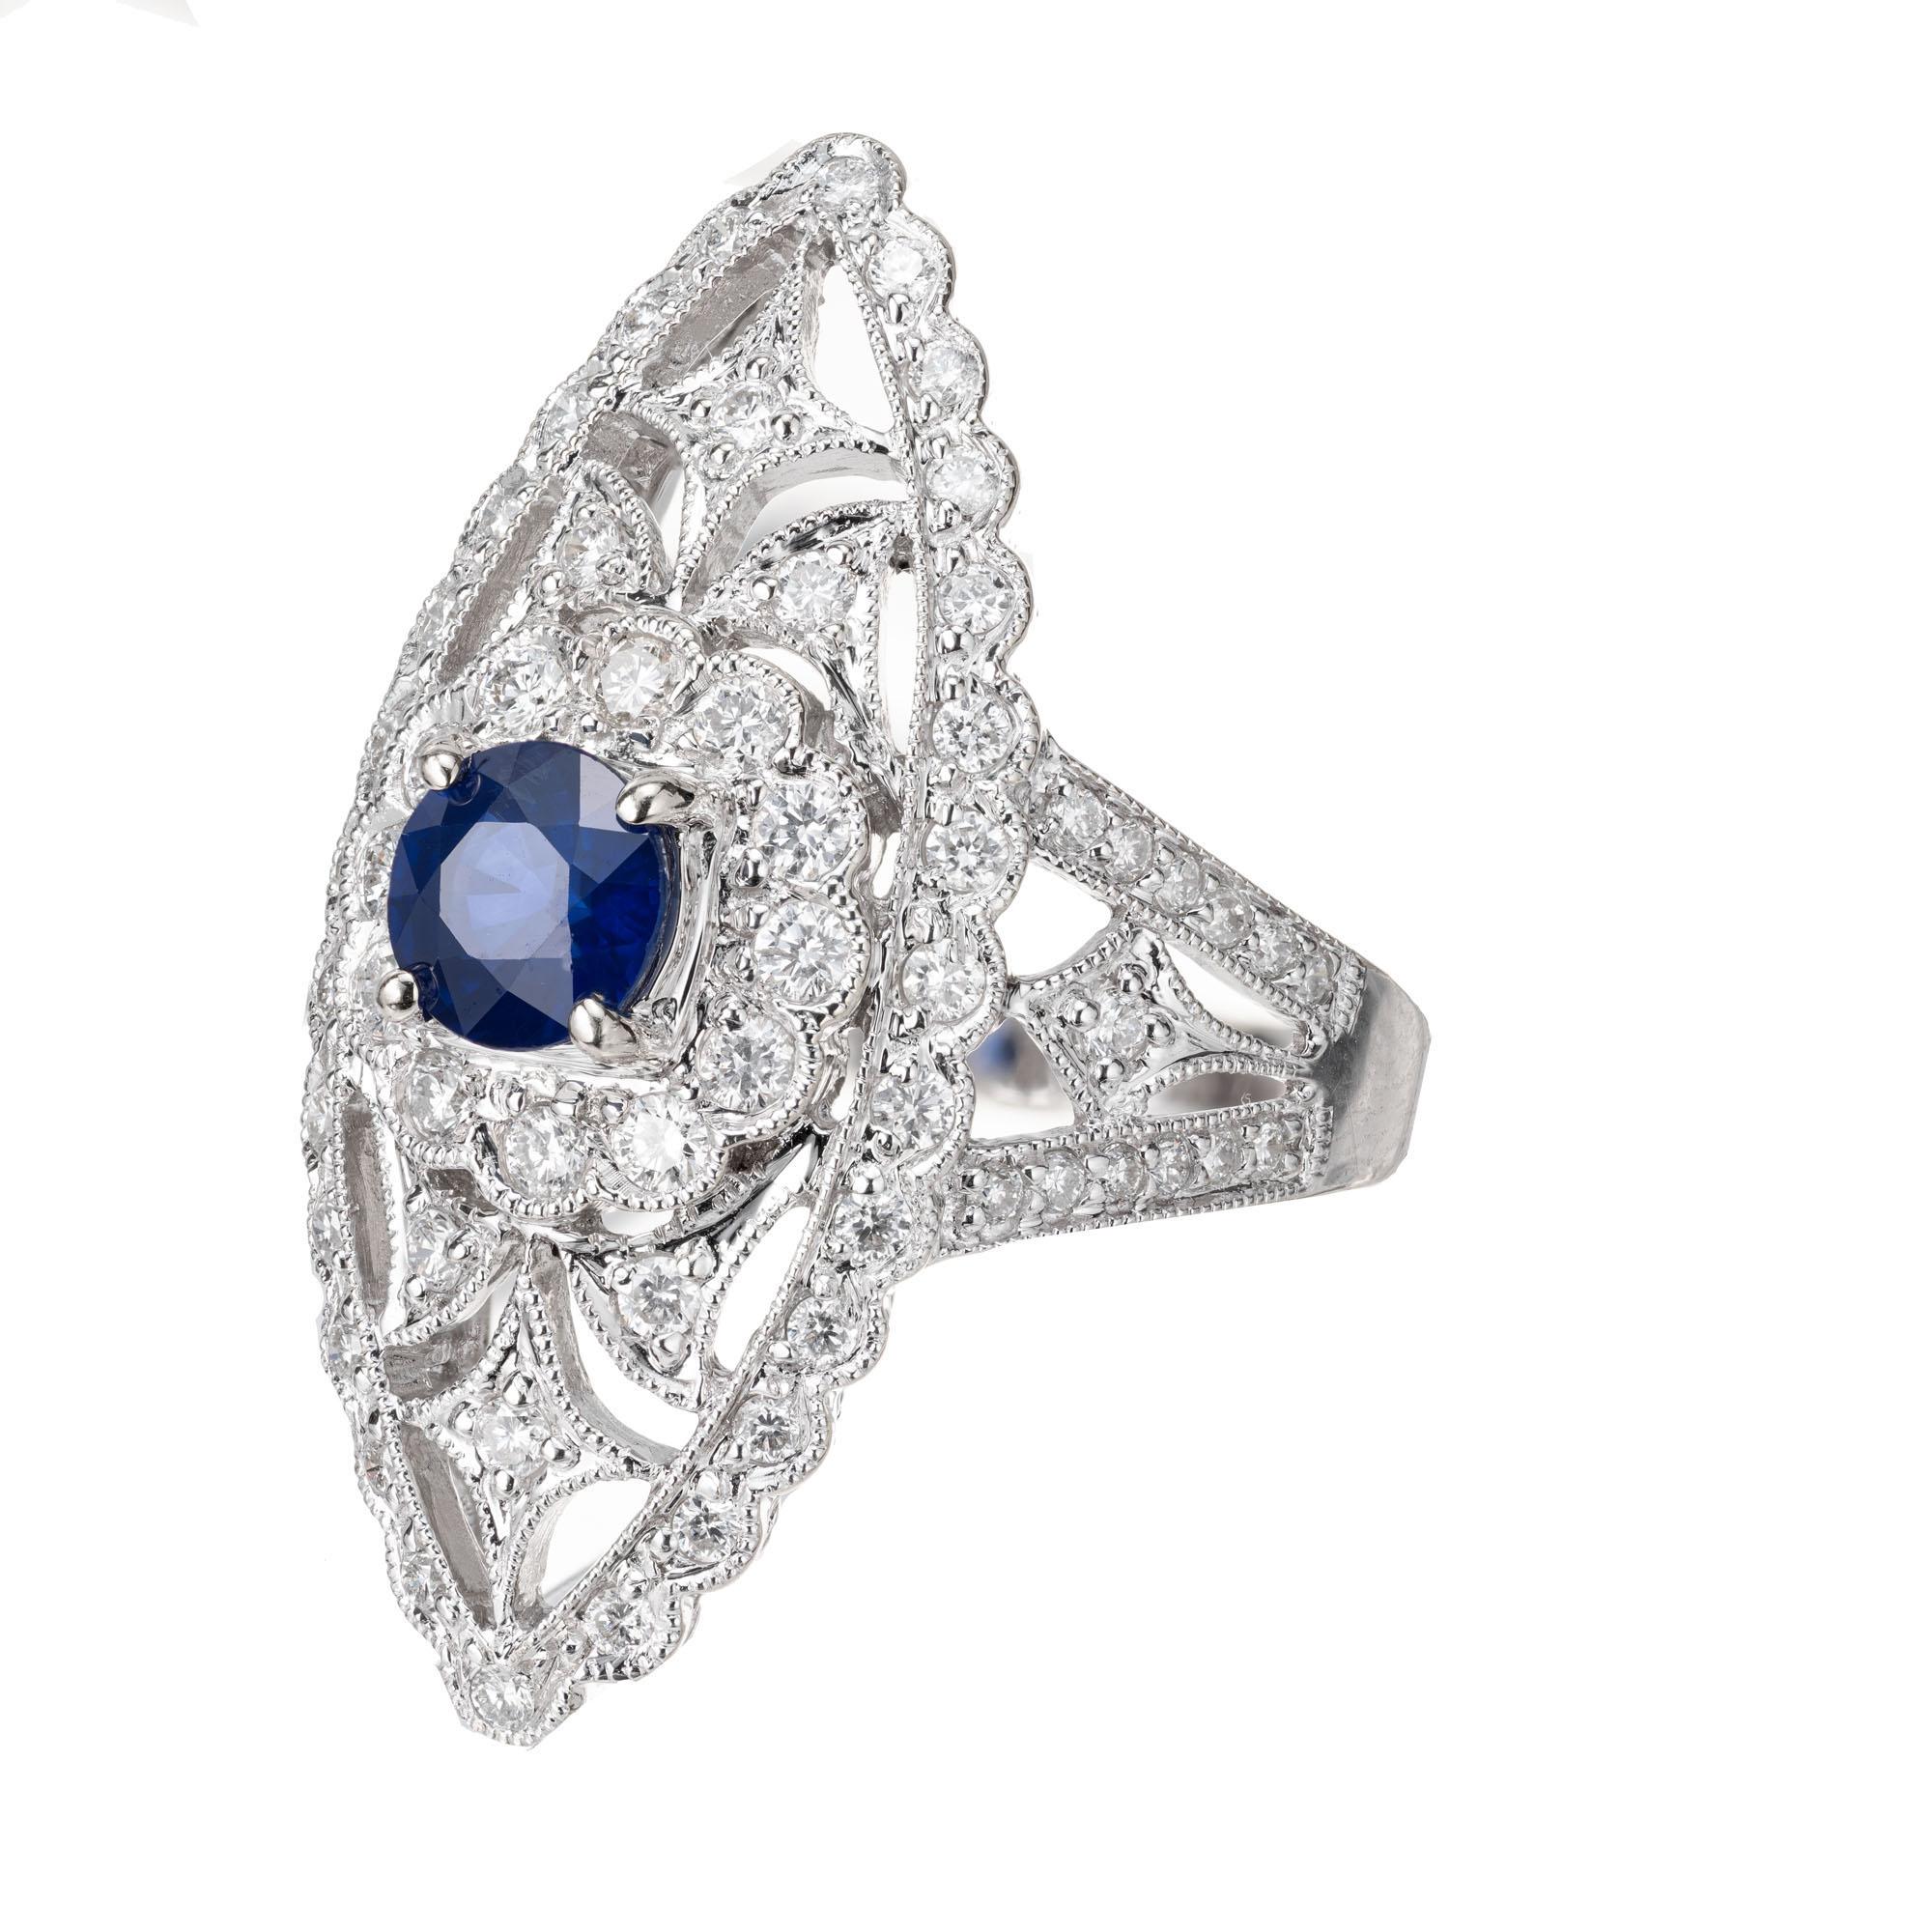 Large marquise shape open work cocktail ring set with a bright blue center sapphire and 72 round brilliant accent diamonds. 18 white gold

1 round blue sapphire SI, approx. .65cts
72 round brilliant cut diamonds G-H SI-I, approx. .85cts
Size 6.5 and